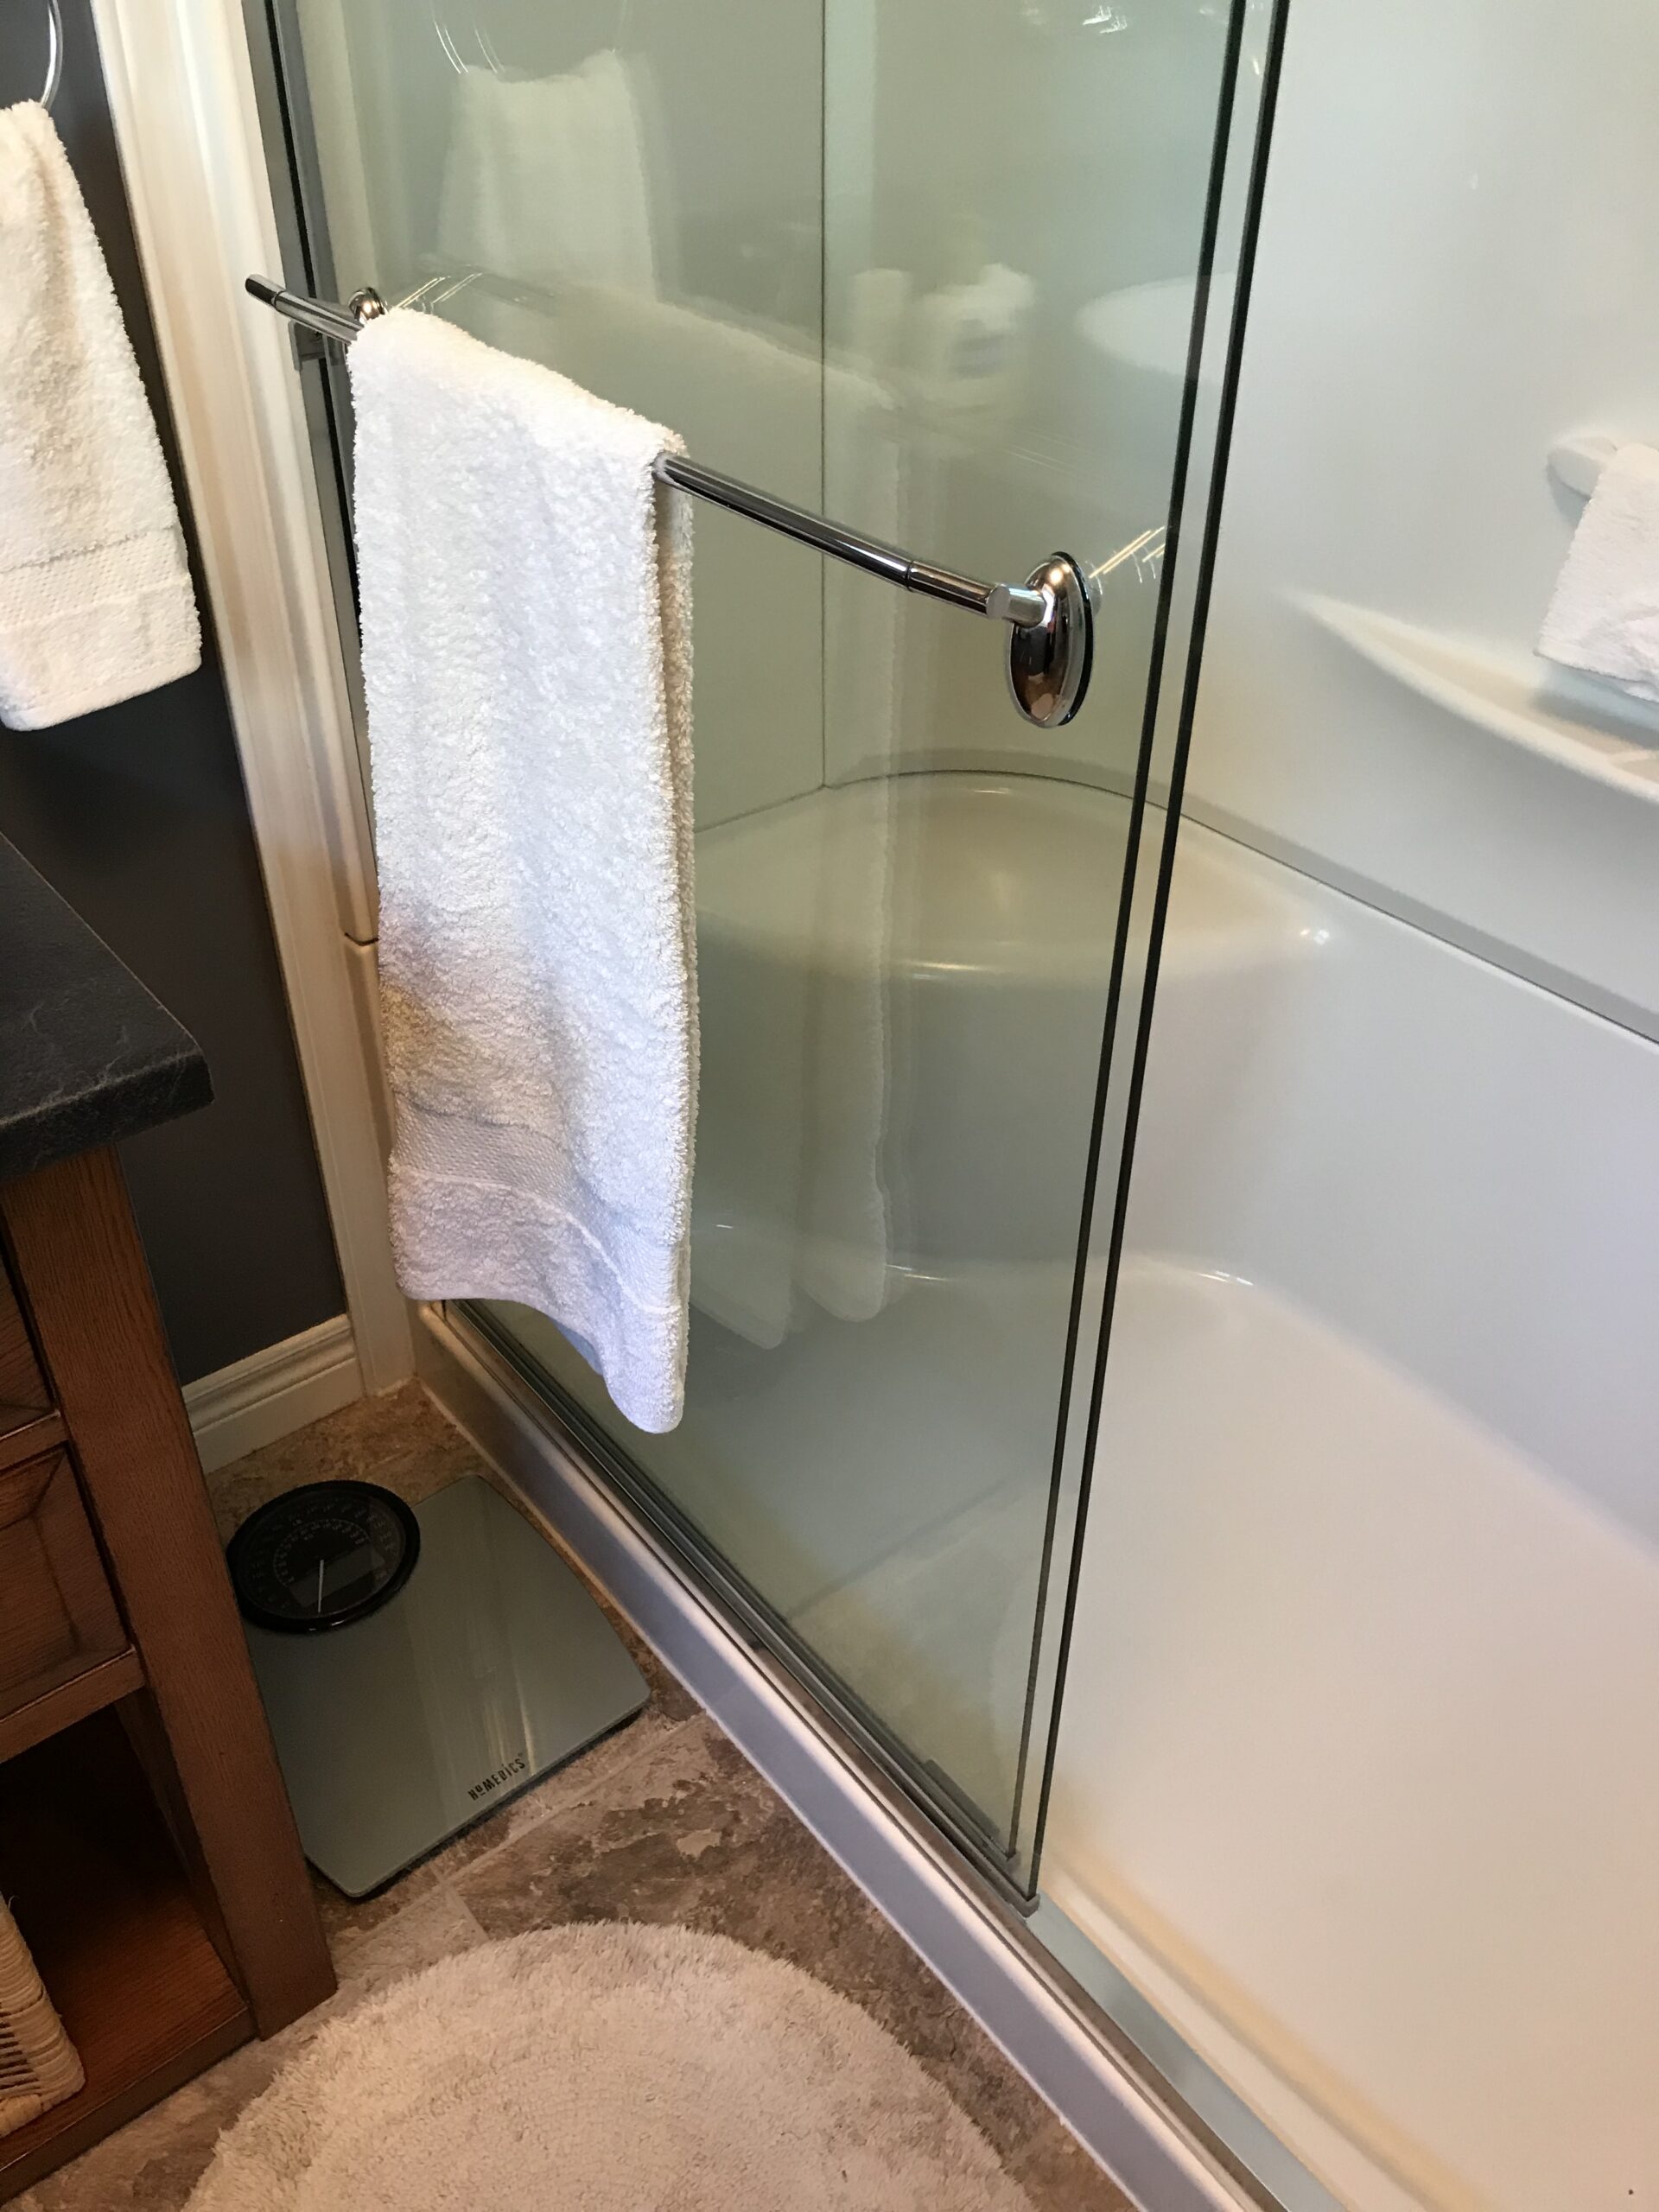 Dated shower from a different angle before replacement and remodeling.